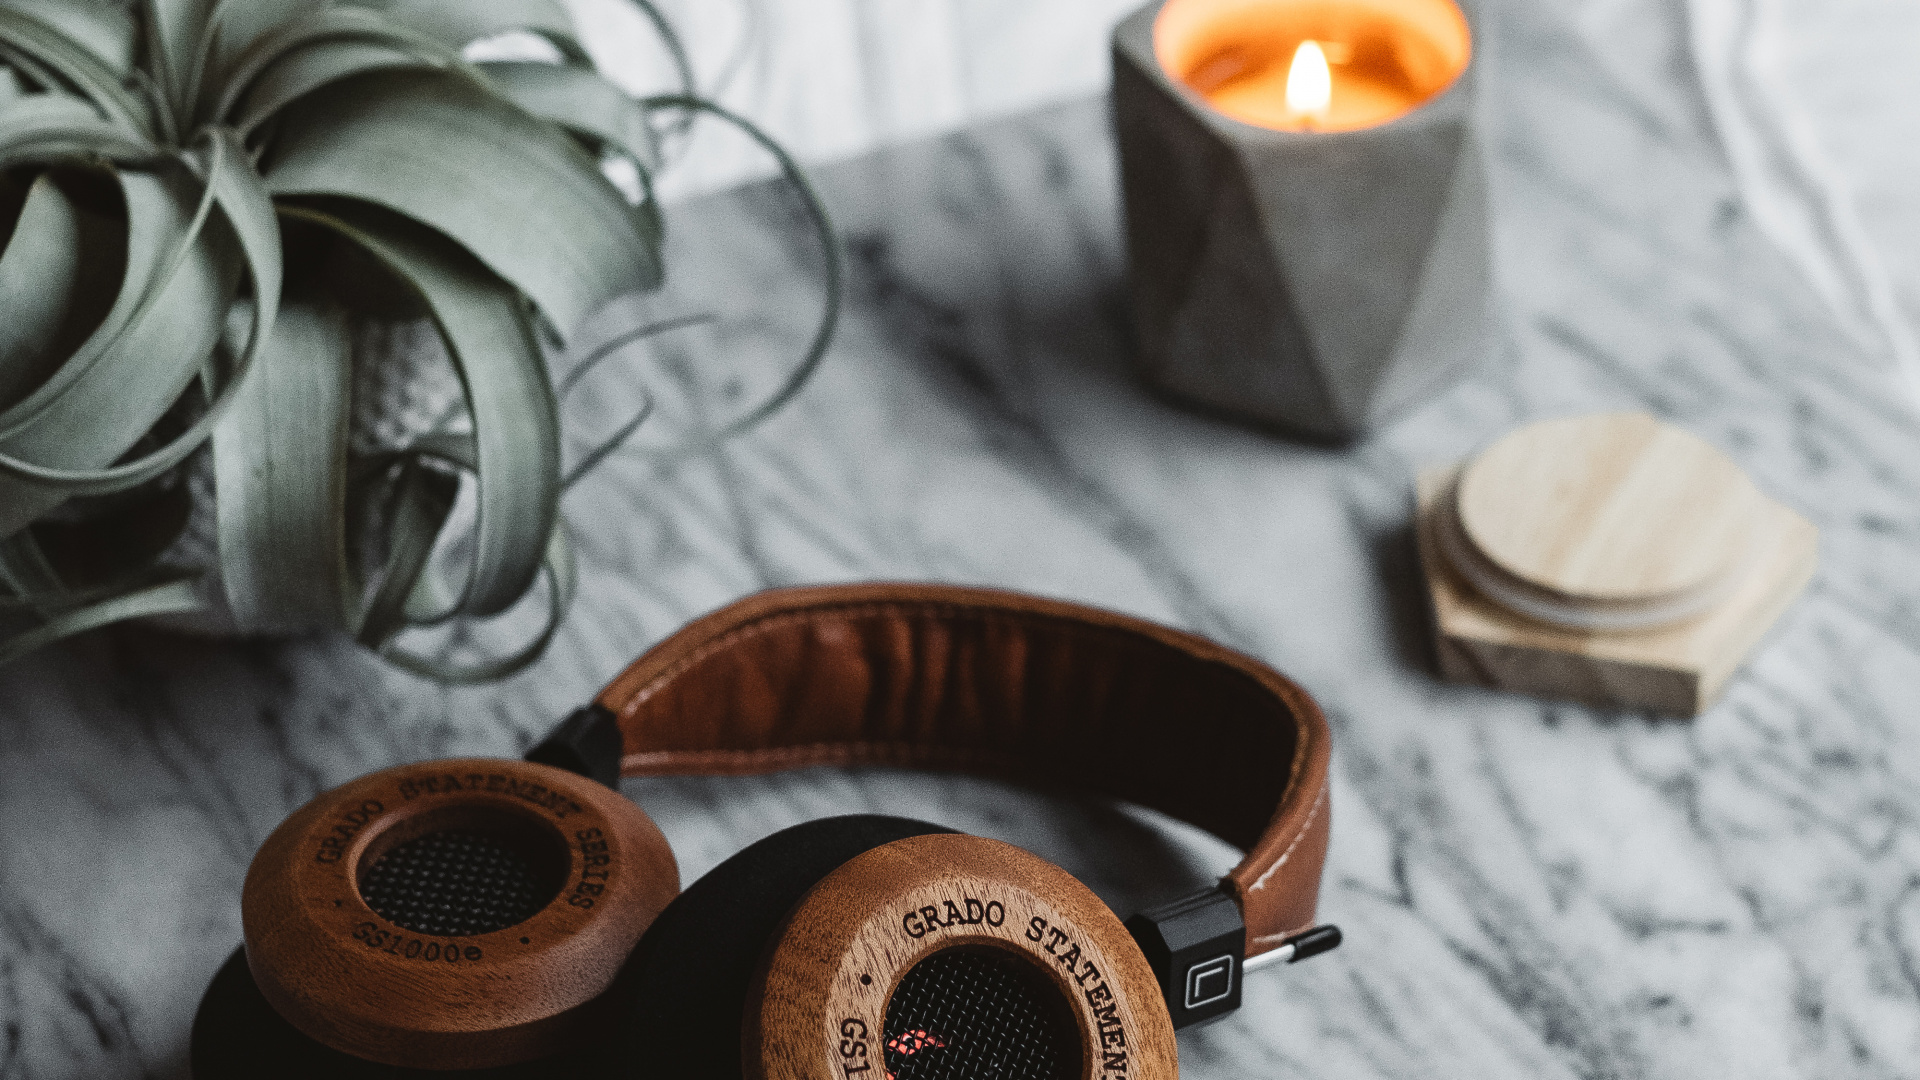 Microphone, Headphones, Wood, Table, Coffee Cup. Wallpaper in 1920x1080 Resolution